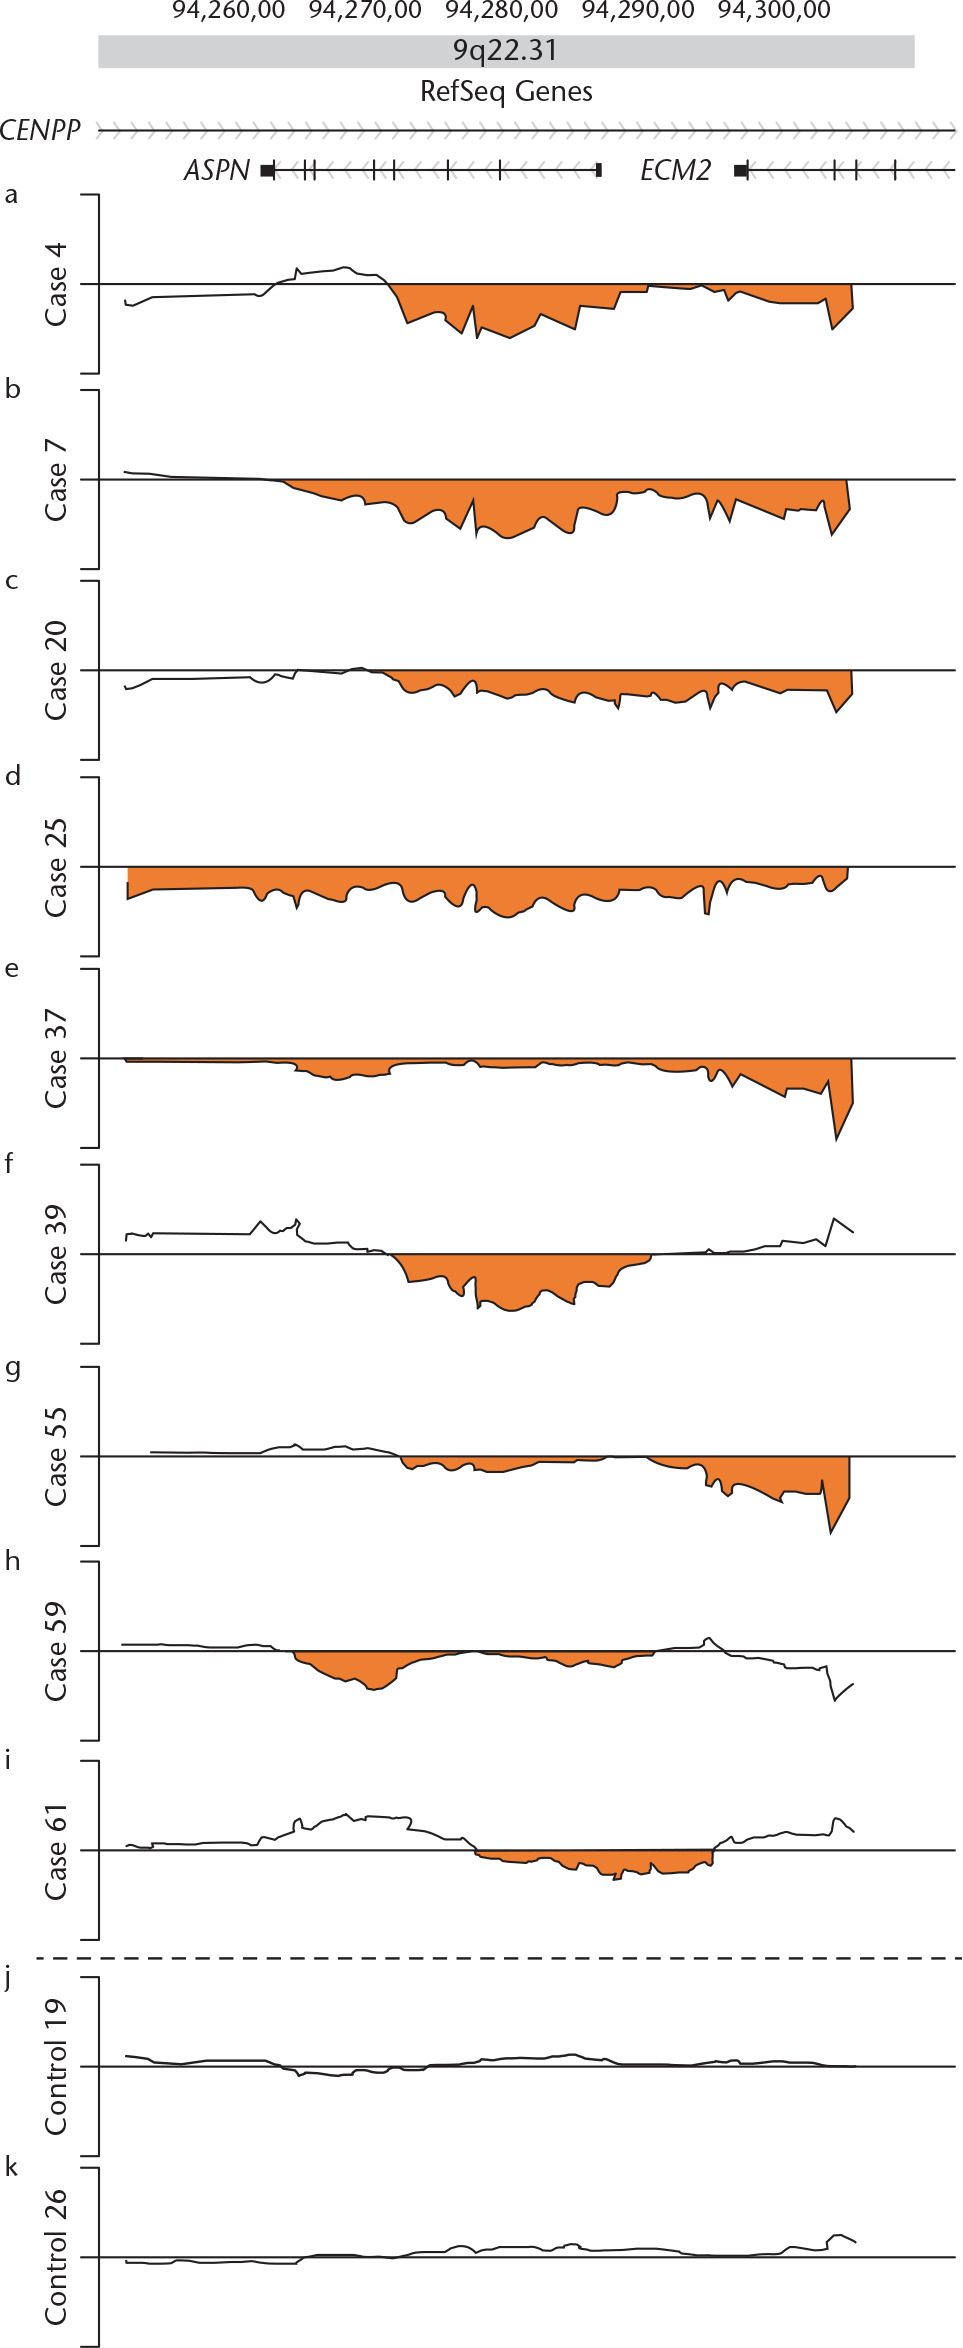 Fig. 2 
            Fine structures of the loss of copy number in the 60 kb 9q22.31 region harbouring the ASPN gene resolved by Agilent high-density tiling microarray. Log2 ratio (y-axis) was plotted using the moving mean along the genome position (x-axis). Plots for the nine affected acetabular dysplasia patients (cases 4, 7, 20, 25, 37, 39, 55, 59, and 61) are shown in parallel with plots of two control subjects (controls 19 and 26). The dark line represents a copy number plot along the genome for each subject between genomic positions 94 250 000 (left) and 94 310 000 (right). The orange areas indicate ‘‘loss of copy number”. The top map shows the positions of putative genes in the region.35CENPP, centromere protein p; ASPN, asporin; ECM2, extracellular matrix protein 2.
          